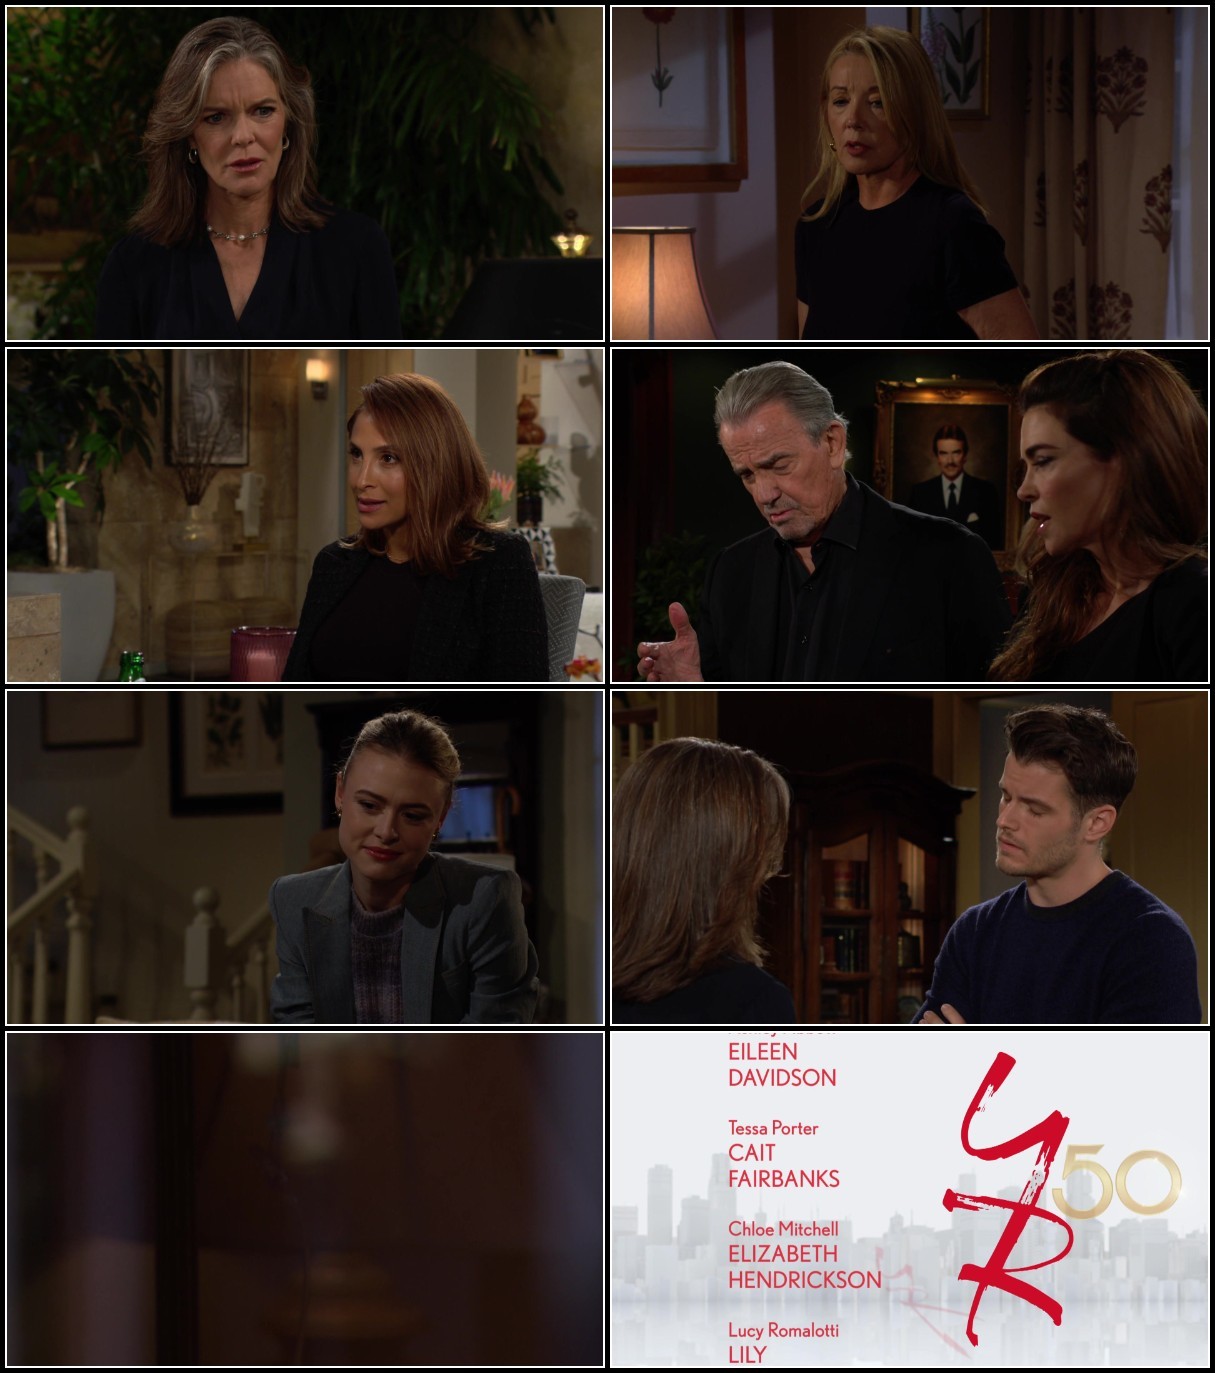 The Young and The Restless S51E33 1080p WEB h264-DiRT